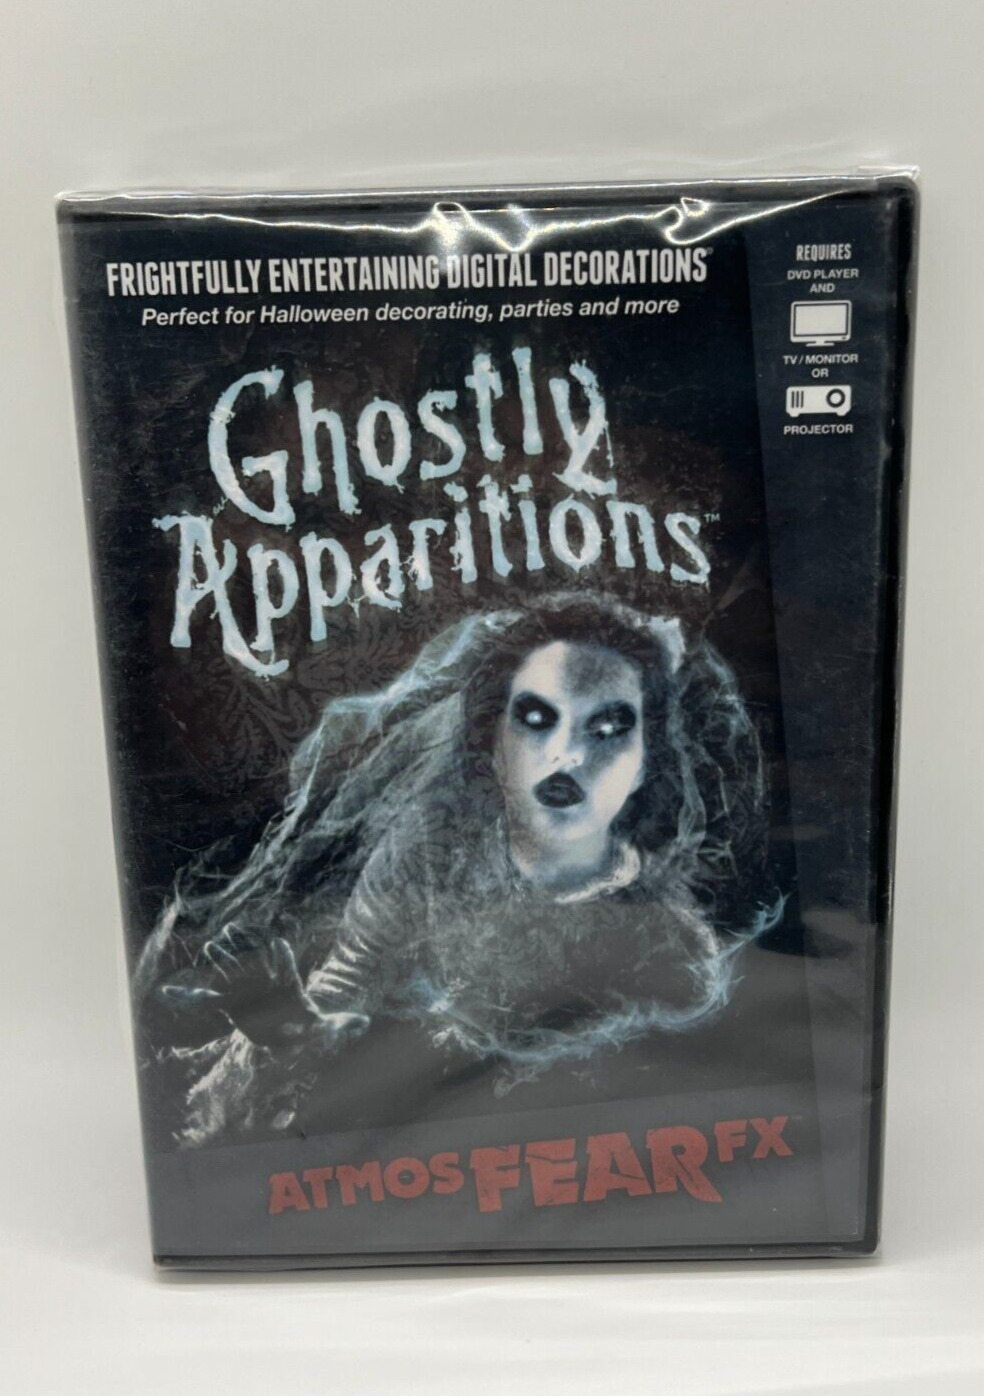 AtmosFEAR FX Ghostly Apparitions DVD Digital Decorations New